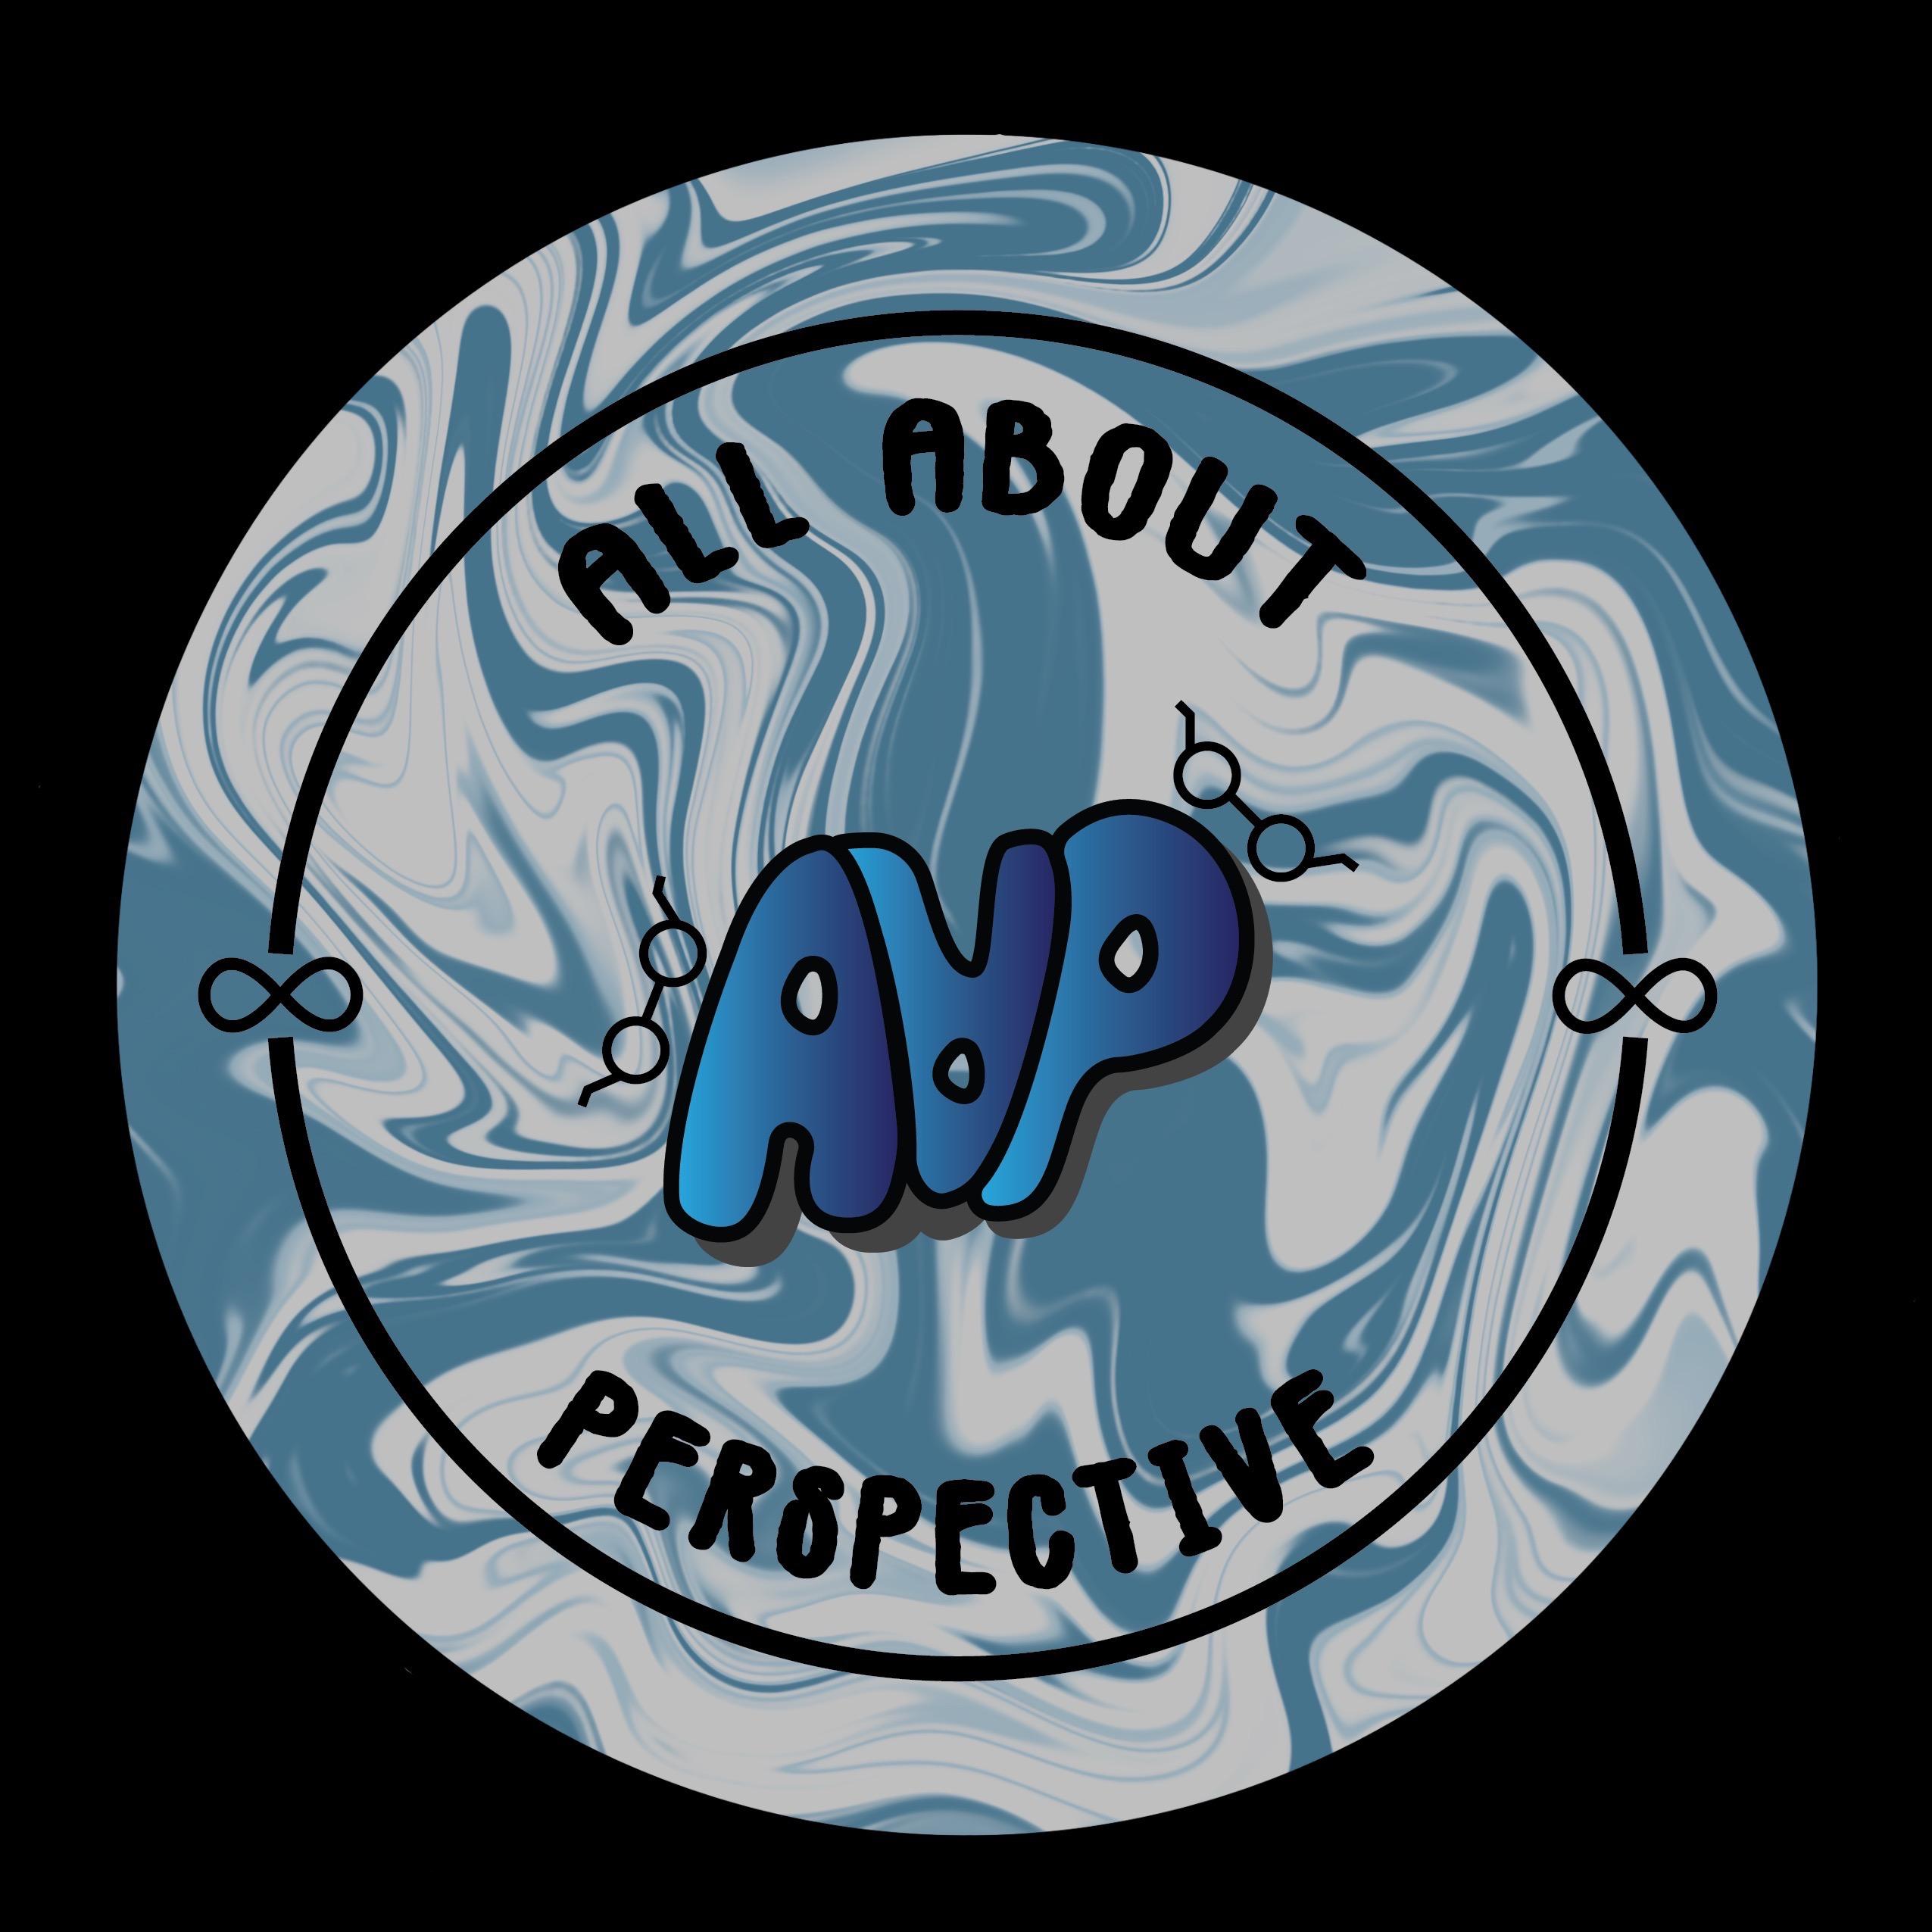 All About Perspective Podcast